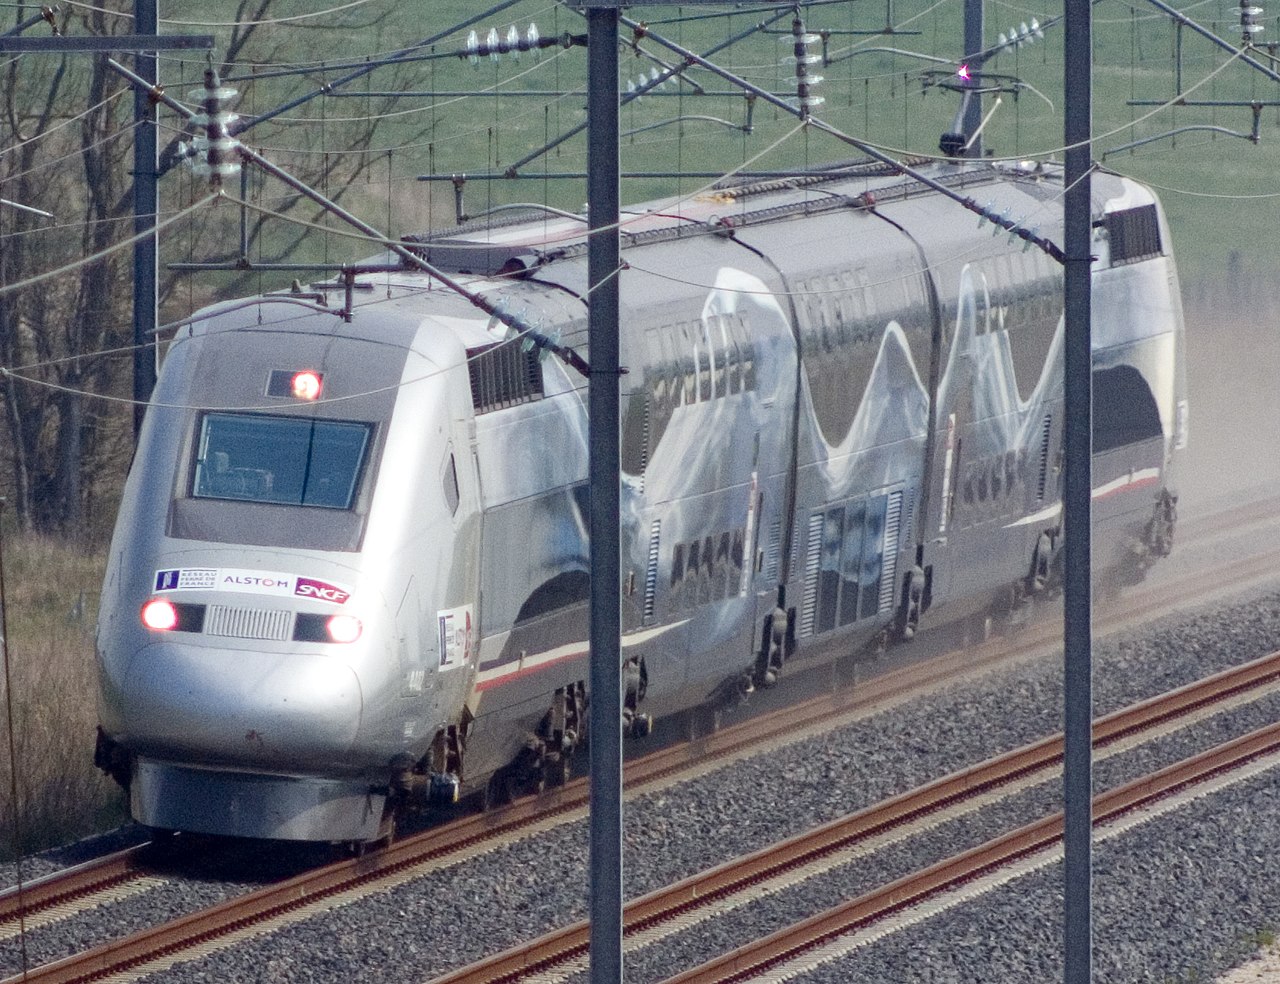 Geometry Adulthood Guidelines File:TGV World Speed Record 574 km per hour (cropped).jpg - Wikimedia  Commons